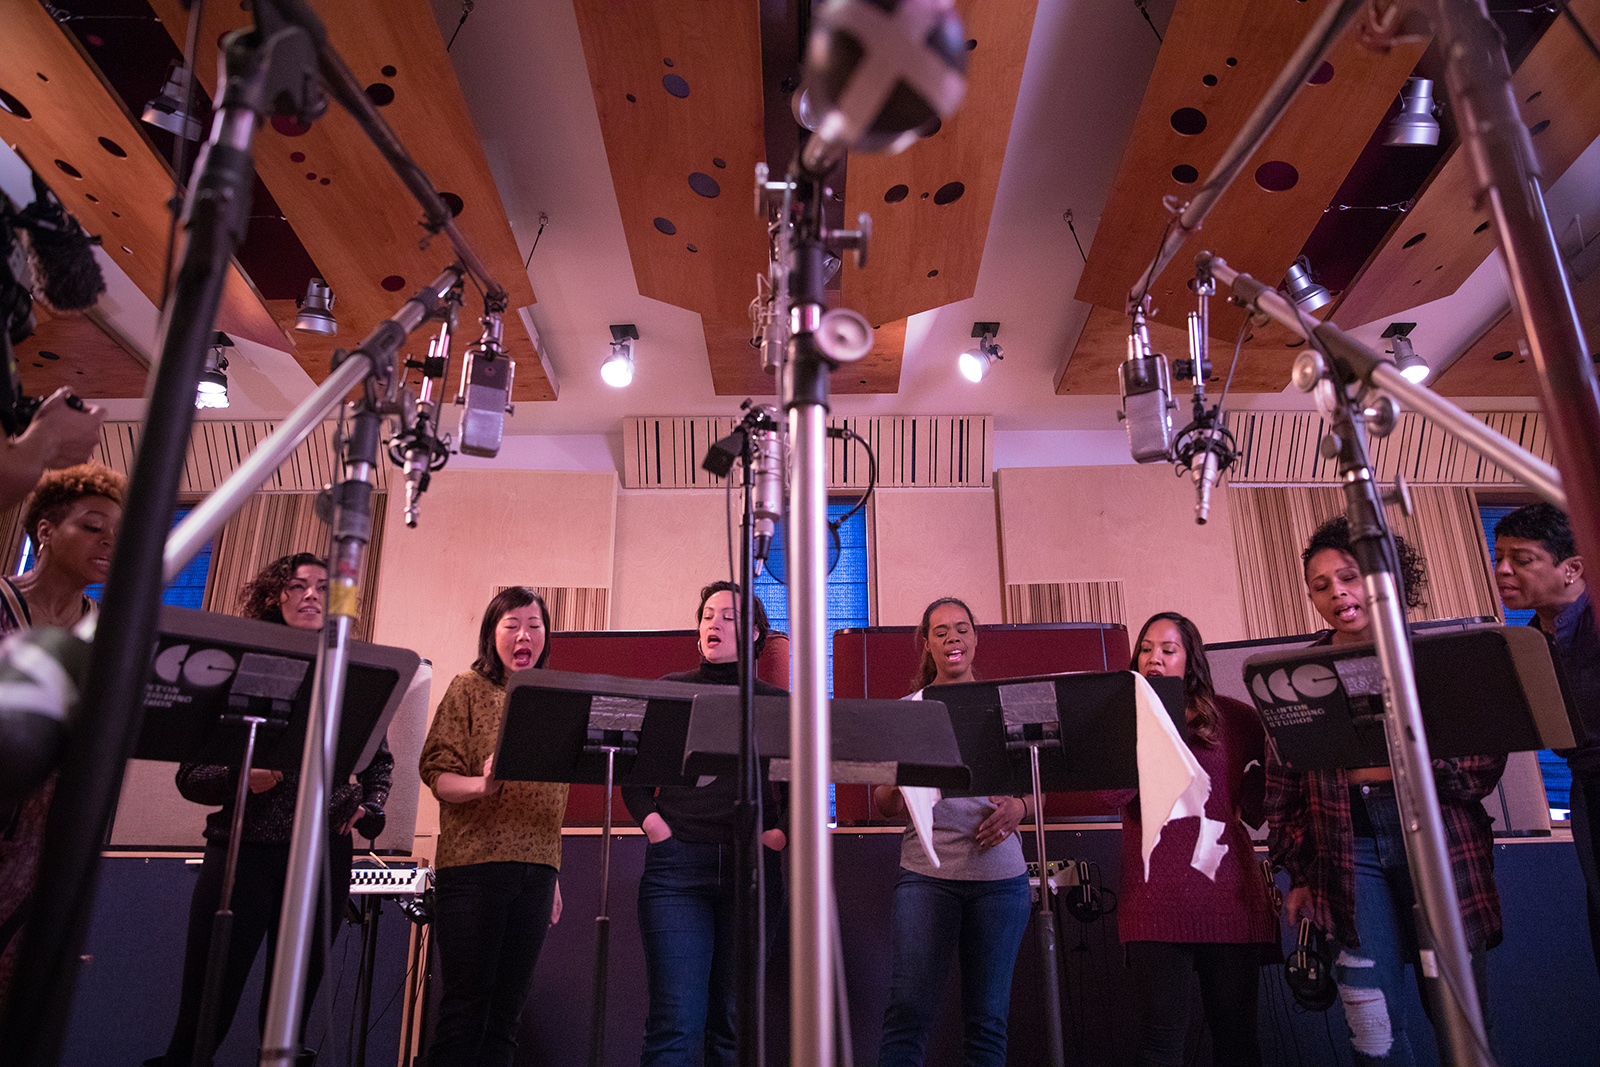 Vocalists Tamika Lawrence, from left, Isabel Santiago, Pearl Sun, Eden Espinosa, Rebecca Covington Webber, Joanne Javien, Jasmin Raen Walker and Marva Hicks record in the studio for “Jesus Christ Superstar: Highlights From the All-Female Studio Cast Recording." Photo by Kat Hennessey